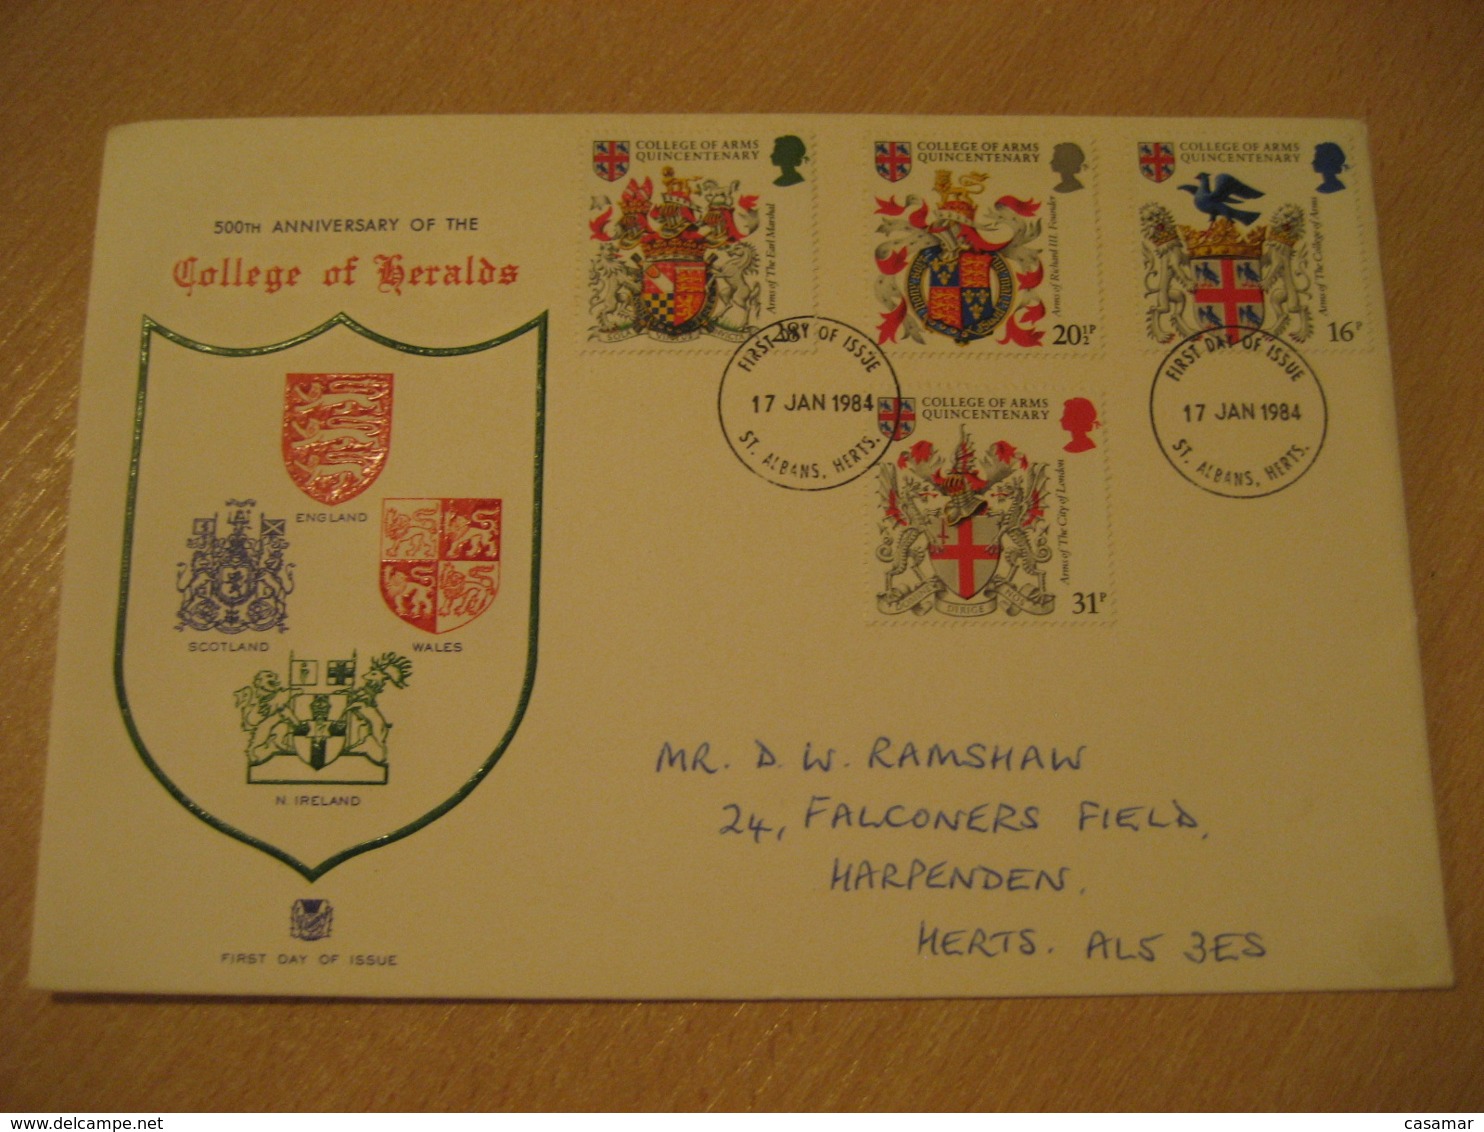 ST ALBANS HERTS 1984 College Of Heralds Coat Of Arms Heraldry FDC Cancel Cover ENGLAND - Briefe U. Dokumente